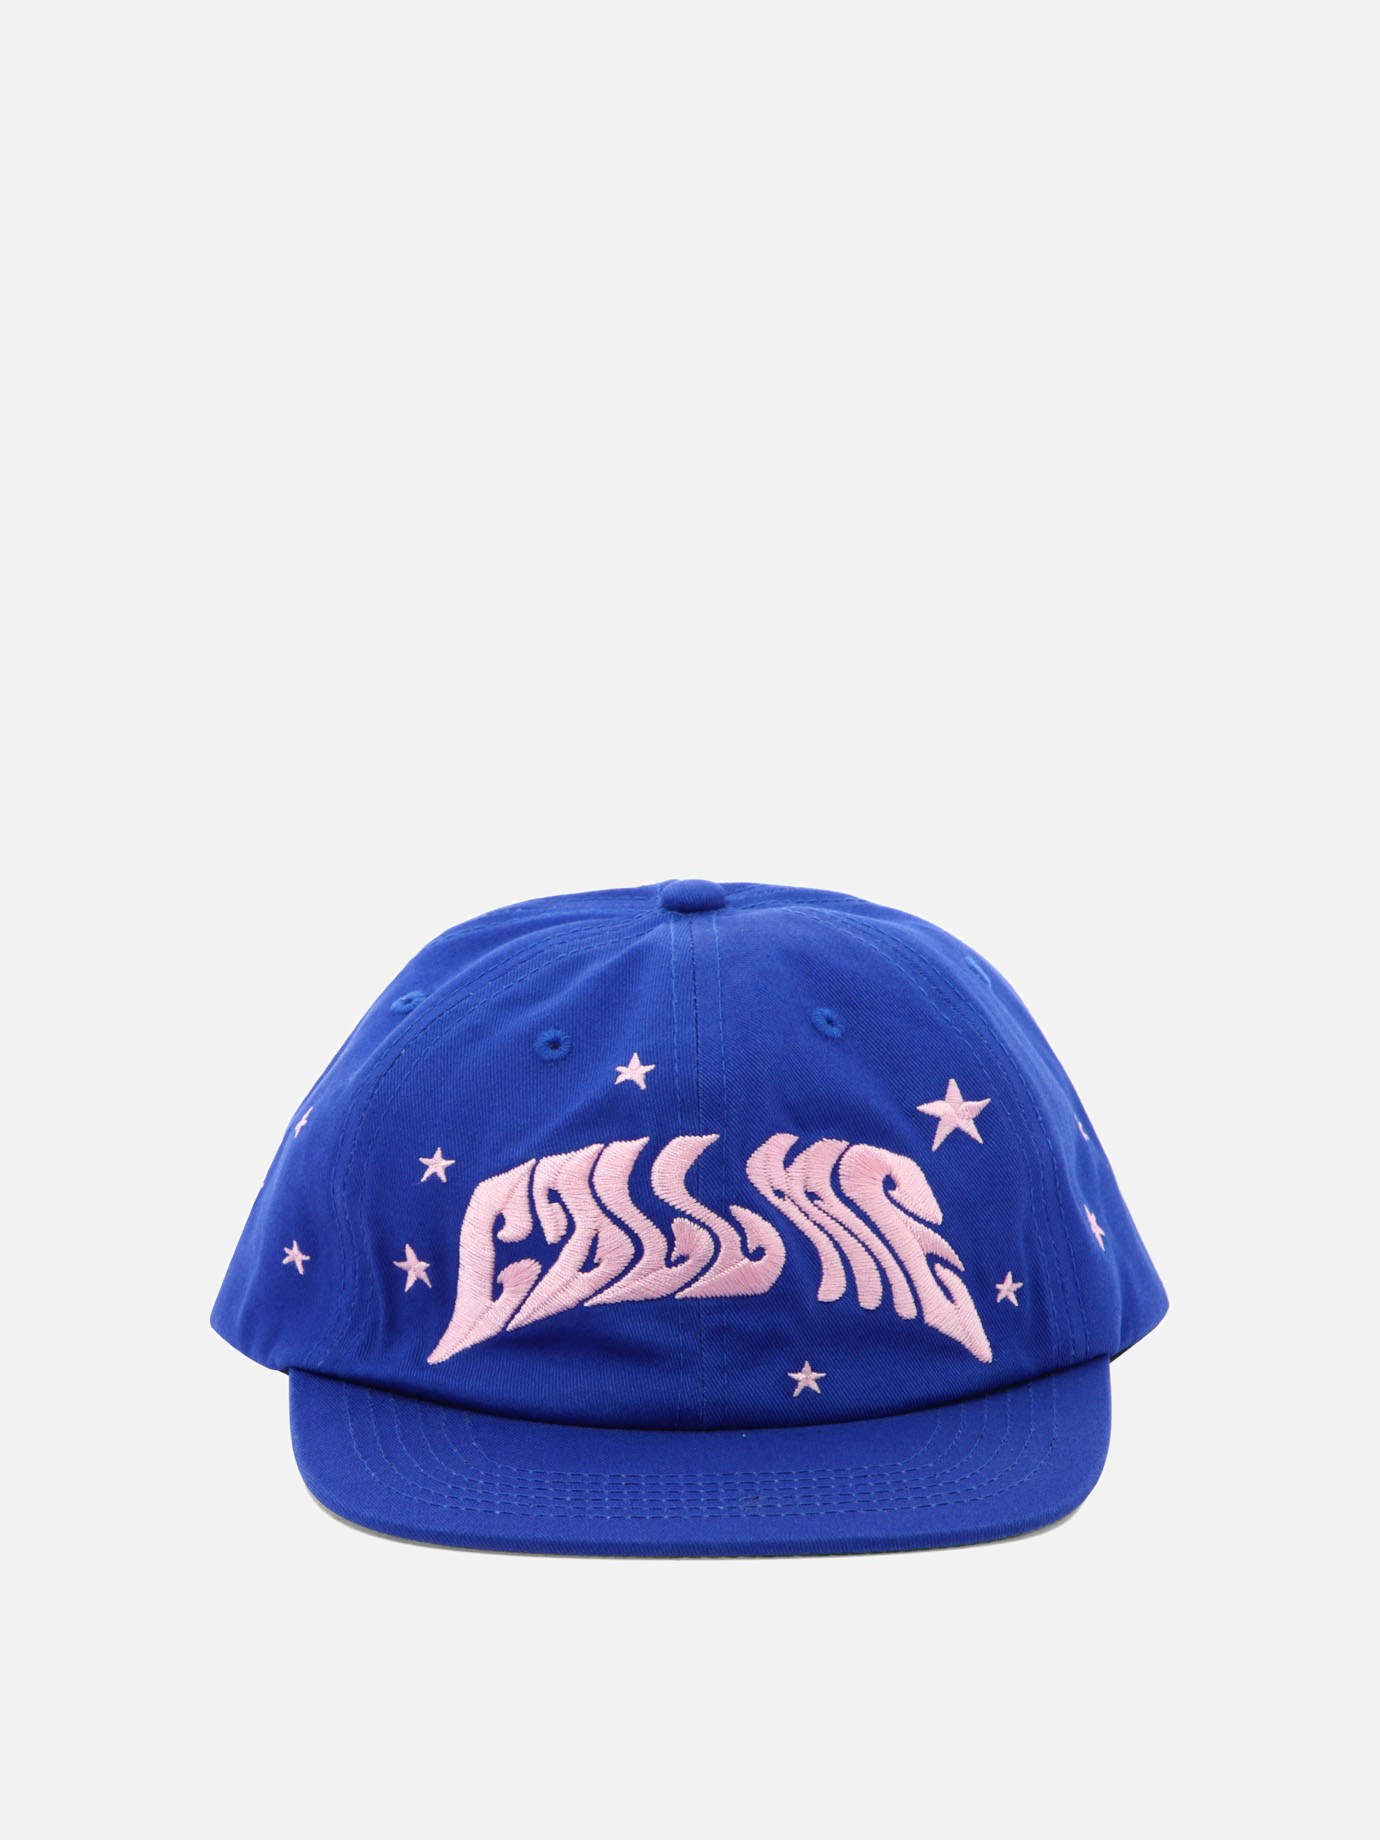 Cappellino  Stars Blue Snapback  by Call Me 917